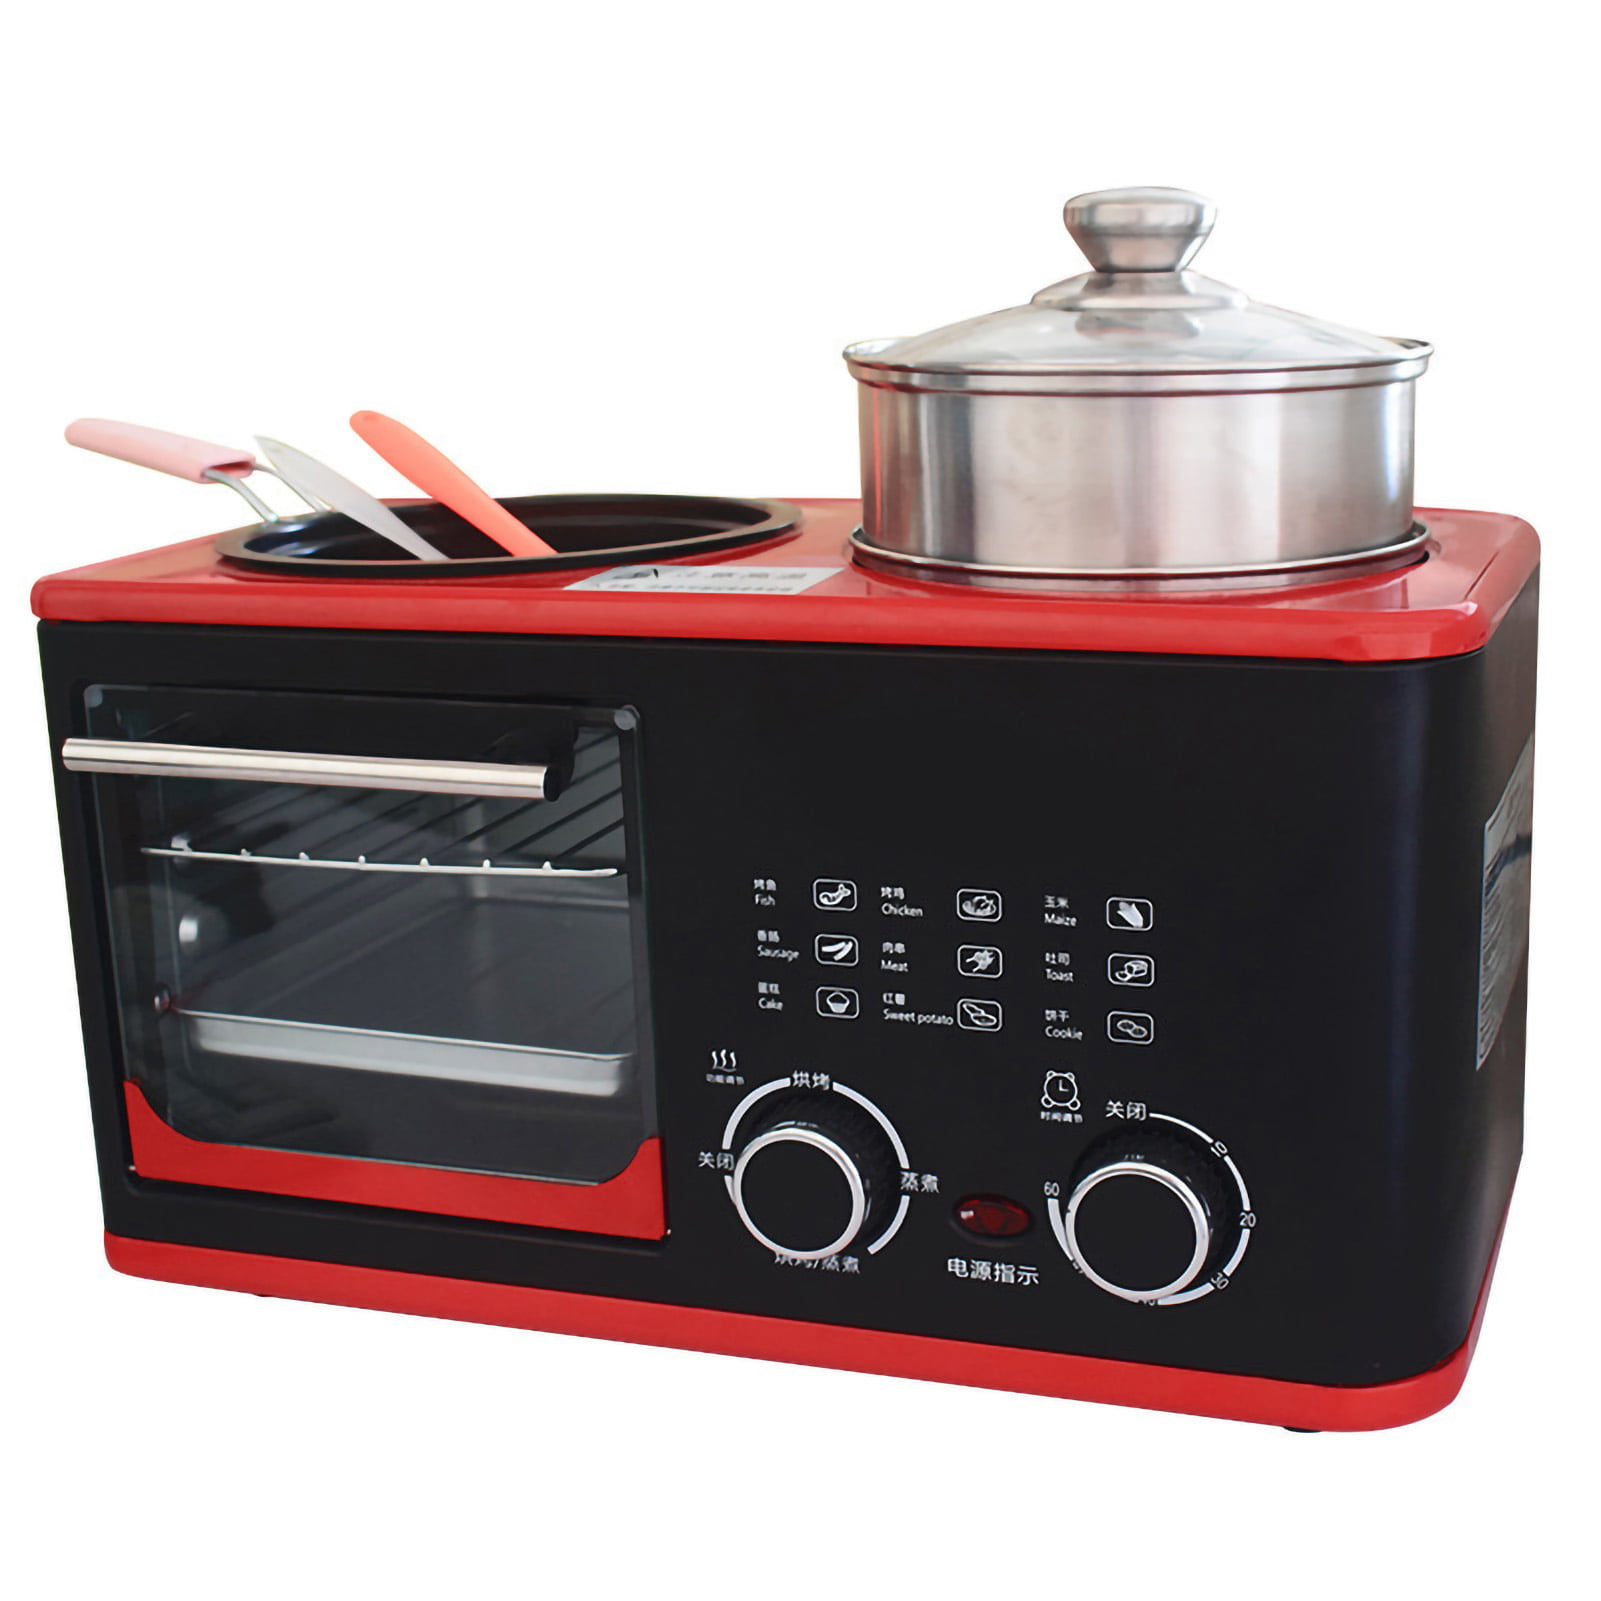 Breakfast Station, Toaster with Frying Pan, Portable Oven Breakfast Maker  with Coffee Machine, Non Stick Die Cast Grill/Griddle for Bread Egg  Sandwich